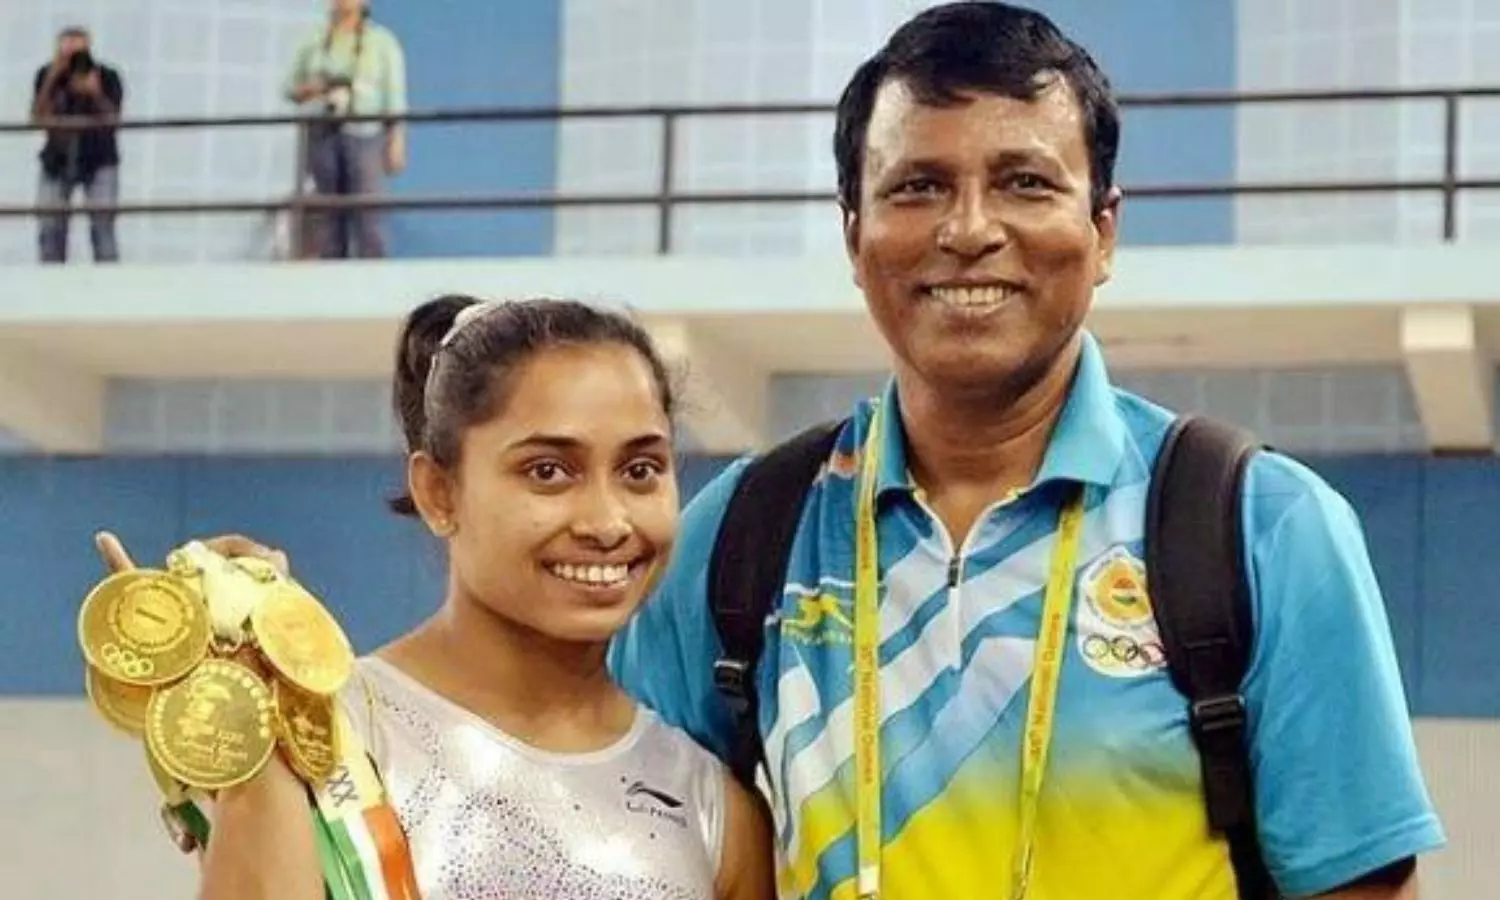 Dipa Karmakar's usage of illegal drug results in a 21-month suspension